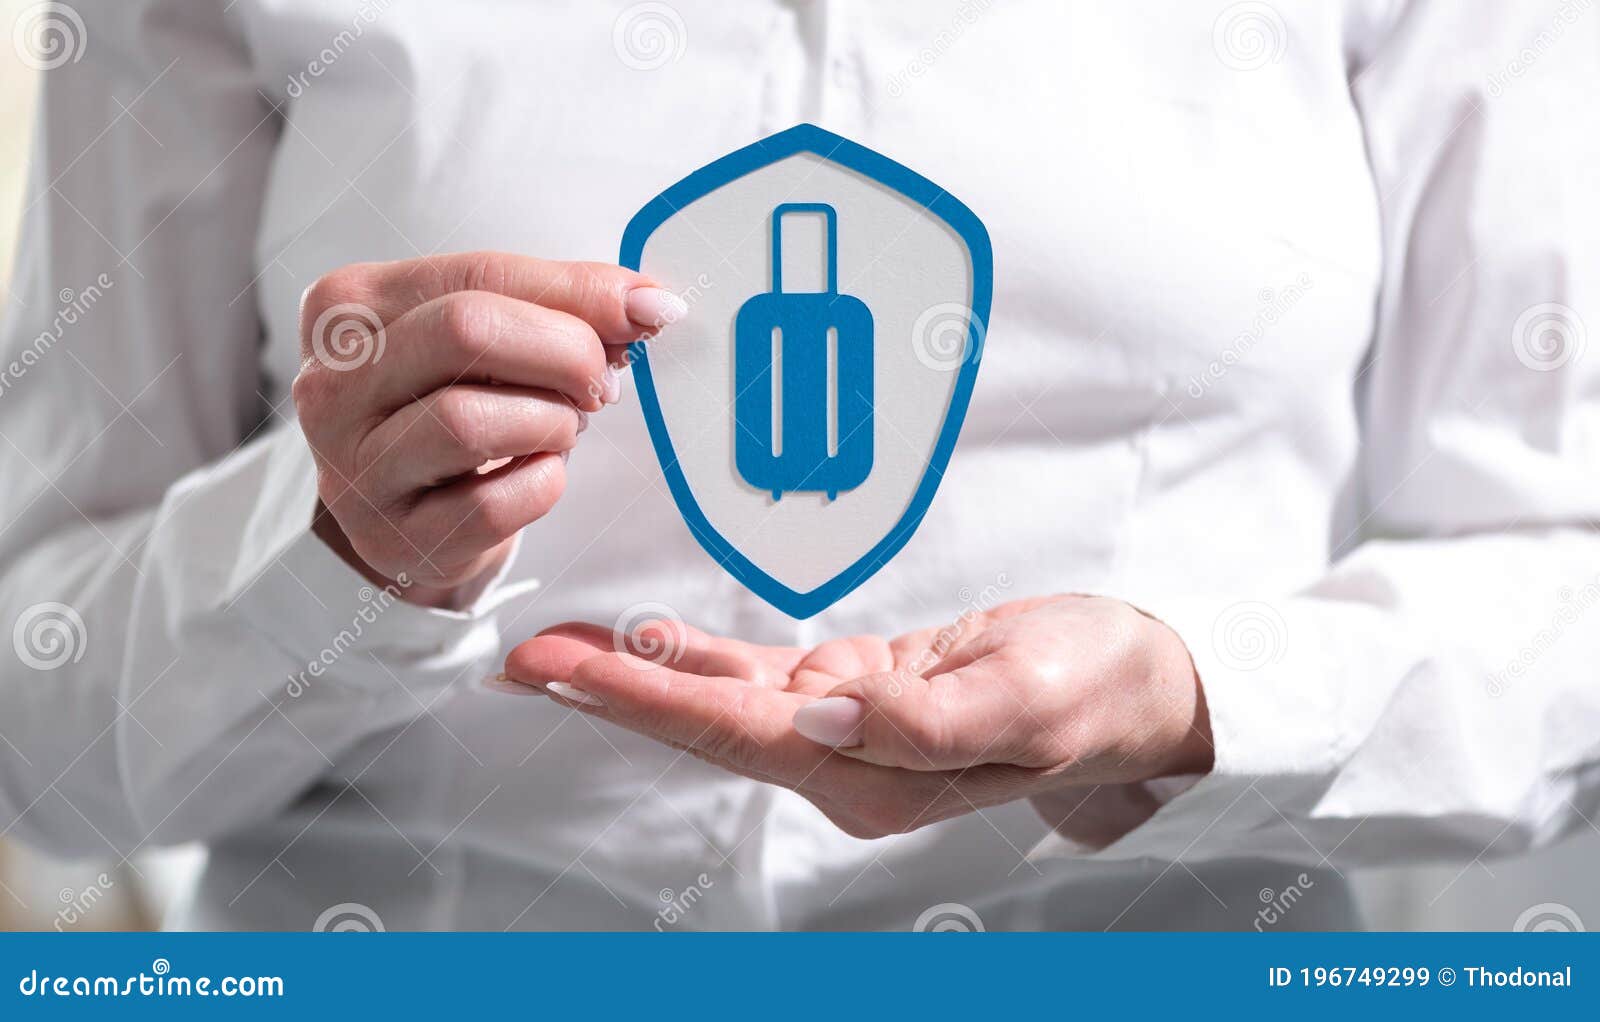 Concept of Baggage Insurance Stock Image - Image of agent, accident ...